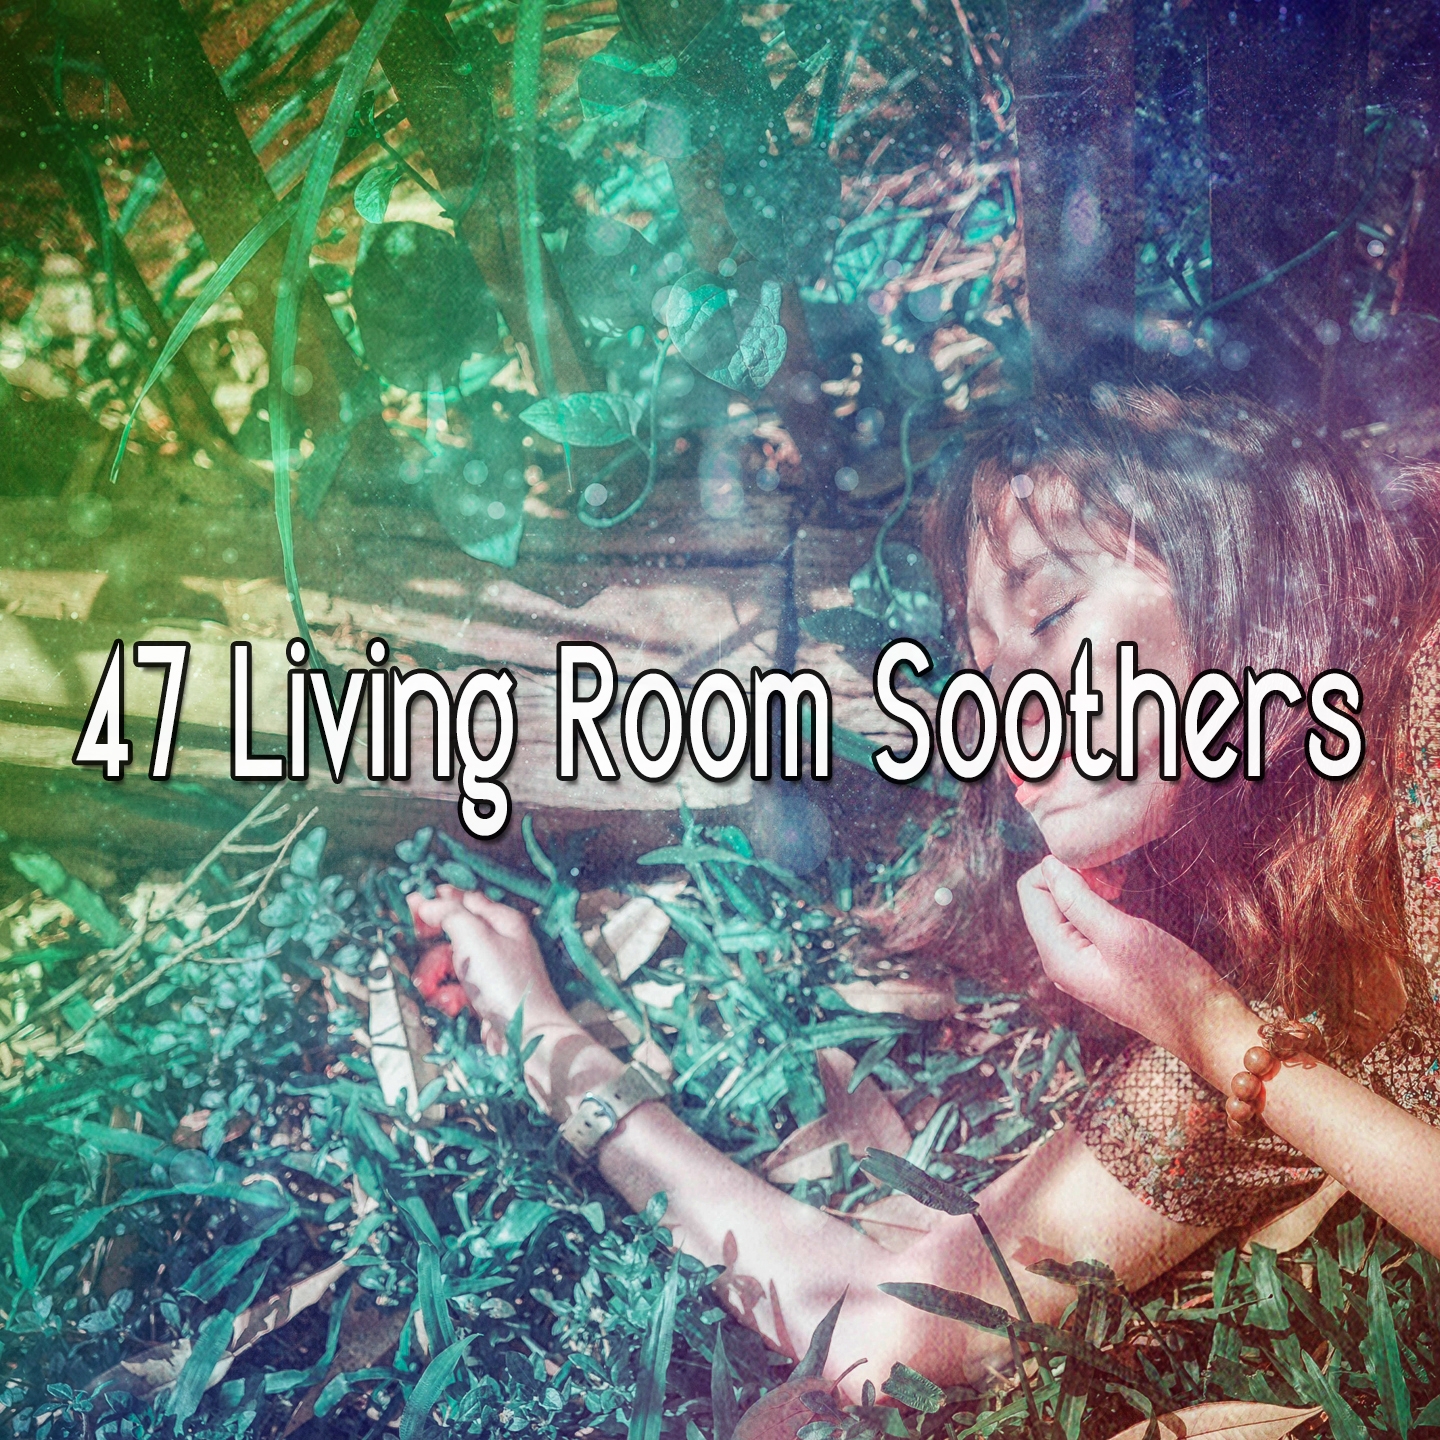 47 Living Room Soothers